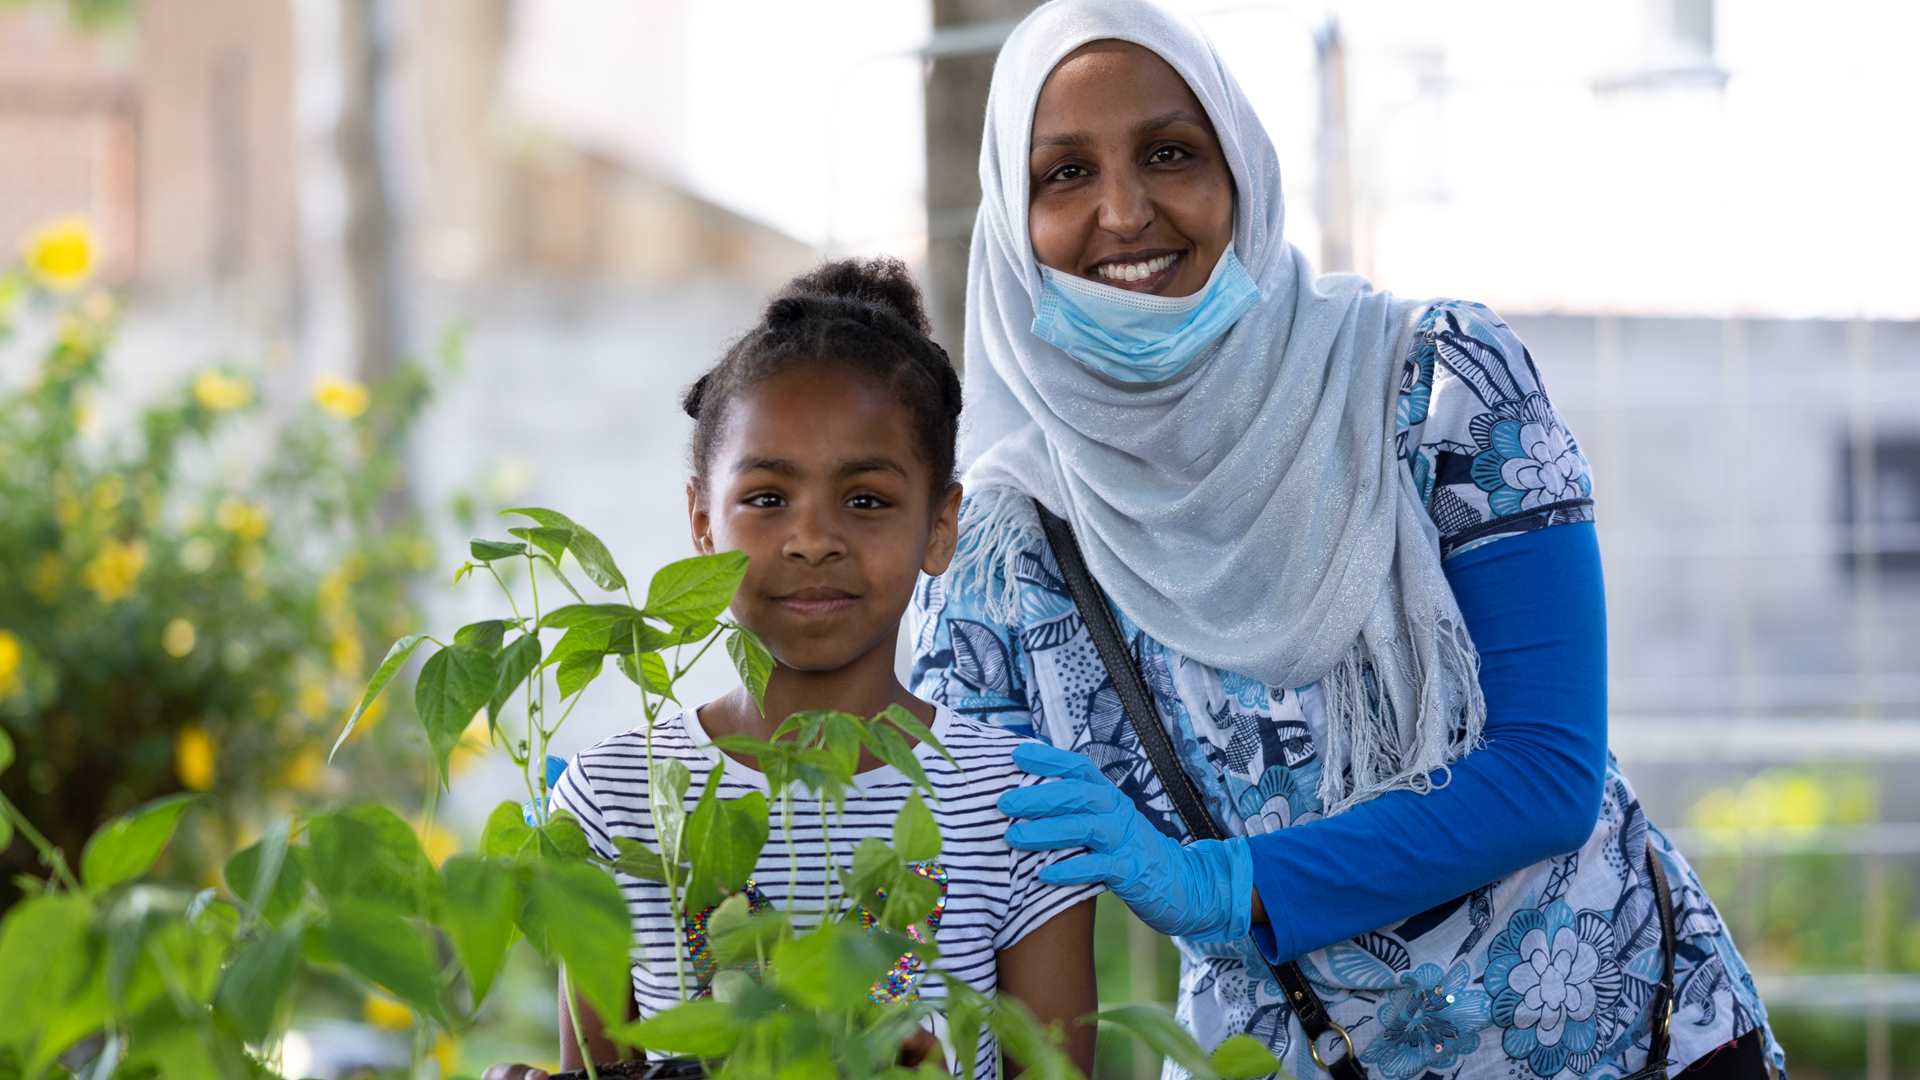 Woman wearing a headscarf with a child standing behind plants and smiling